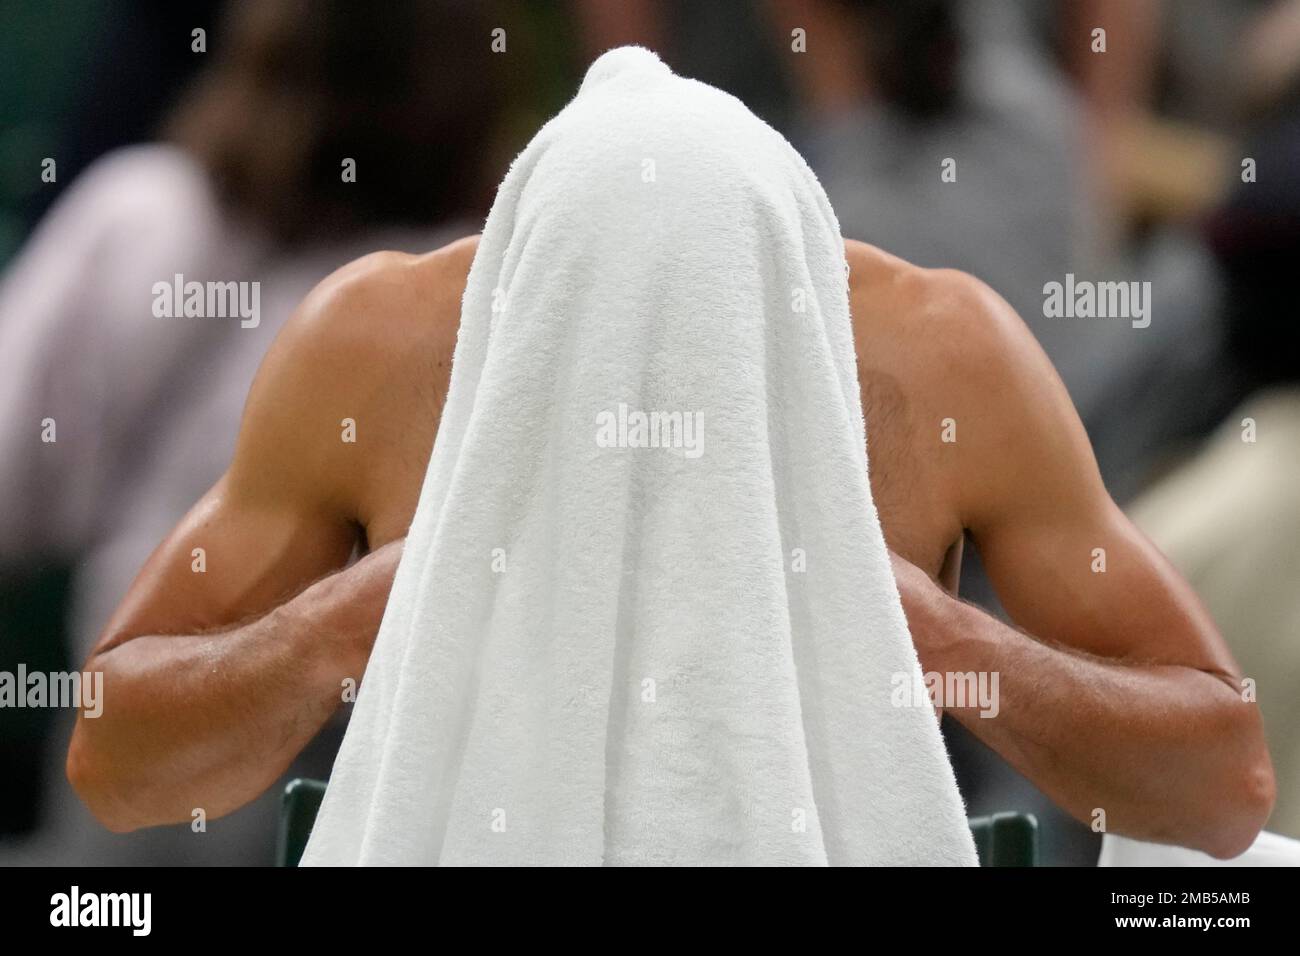 Serbias Novak Djokovic changes his shirt after the second set against Tim van Rijthoven of the Netherlands during a mens fourth round singles match on day seven of the Wimbledon tennis championships